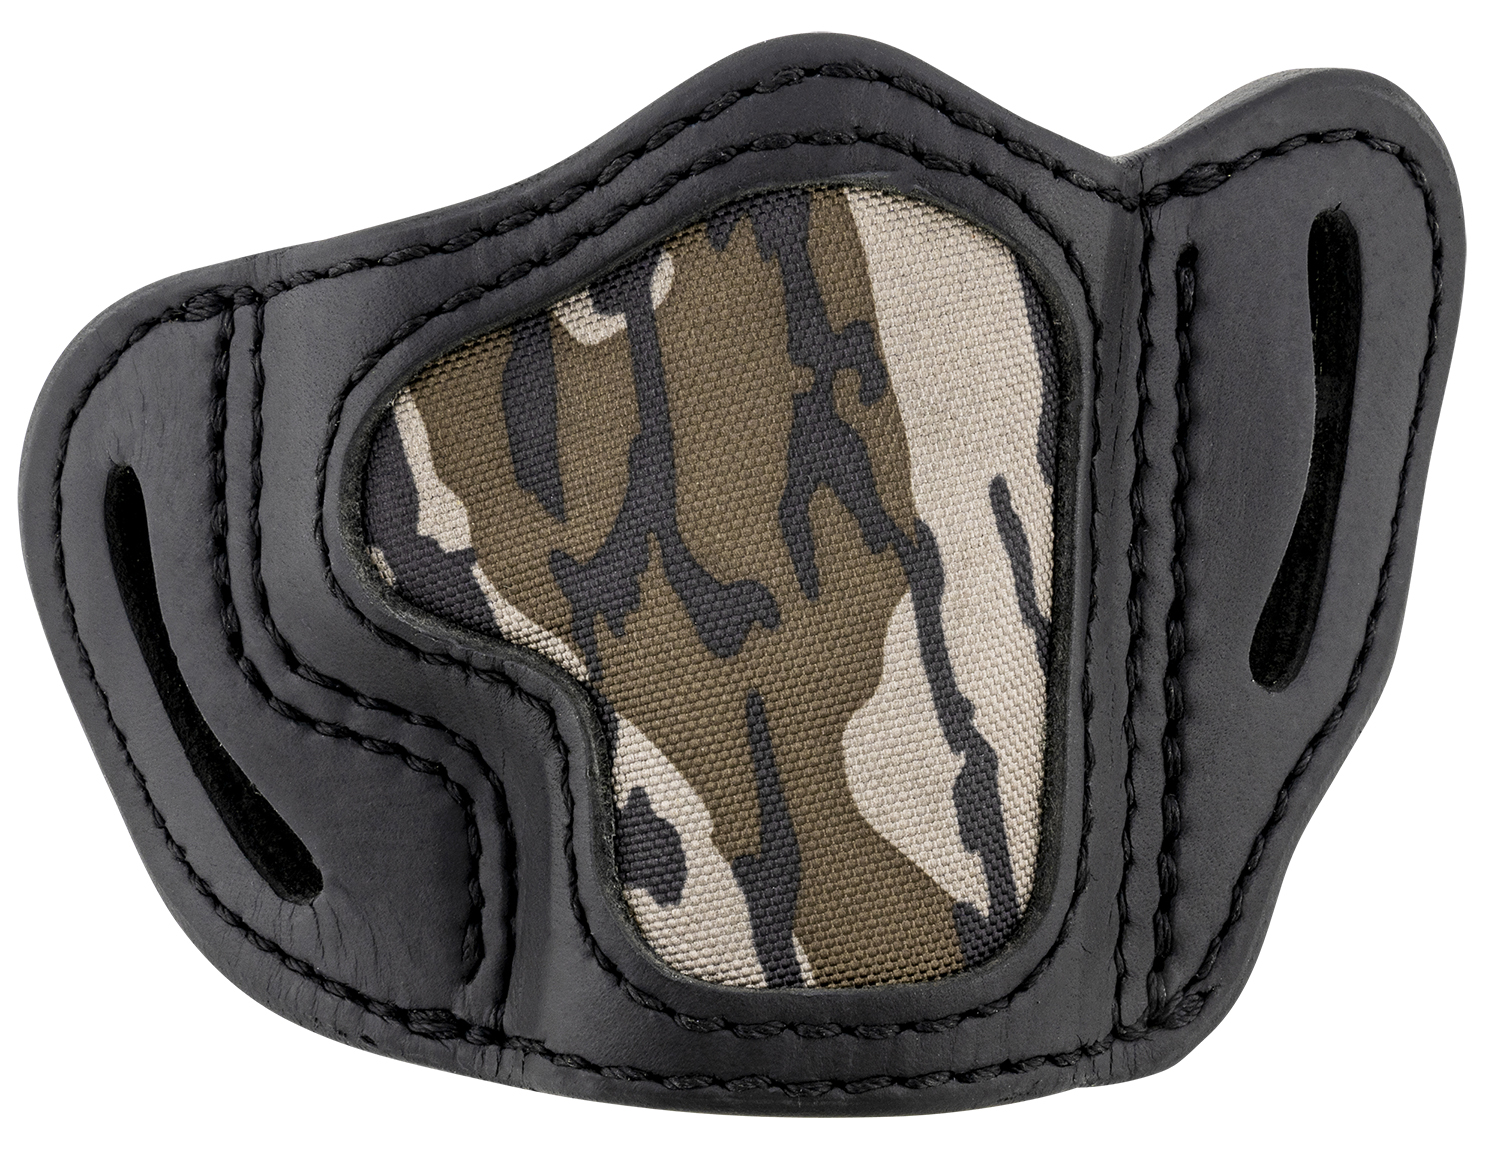 1791 Gunleather MOBHCSBLR BHC Optic Ready OWB Size C Mossy Oak/Stealth Black Leather Belt Slide Compatible w/Glock 43/Sig P365/Walther PPK Right Hand